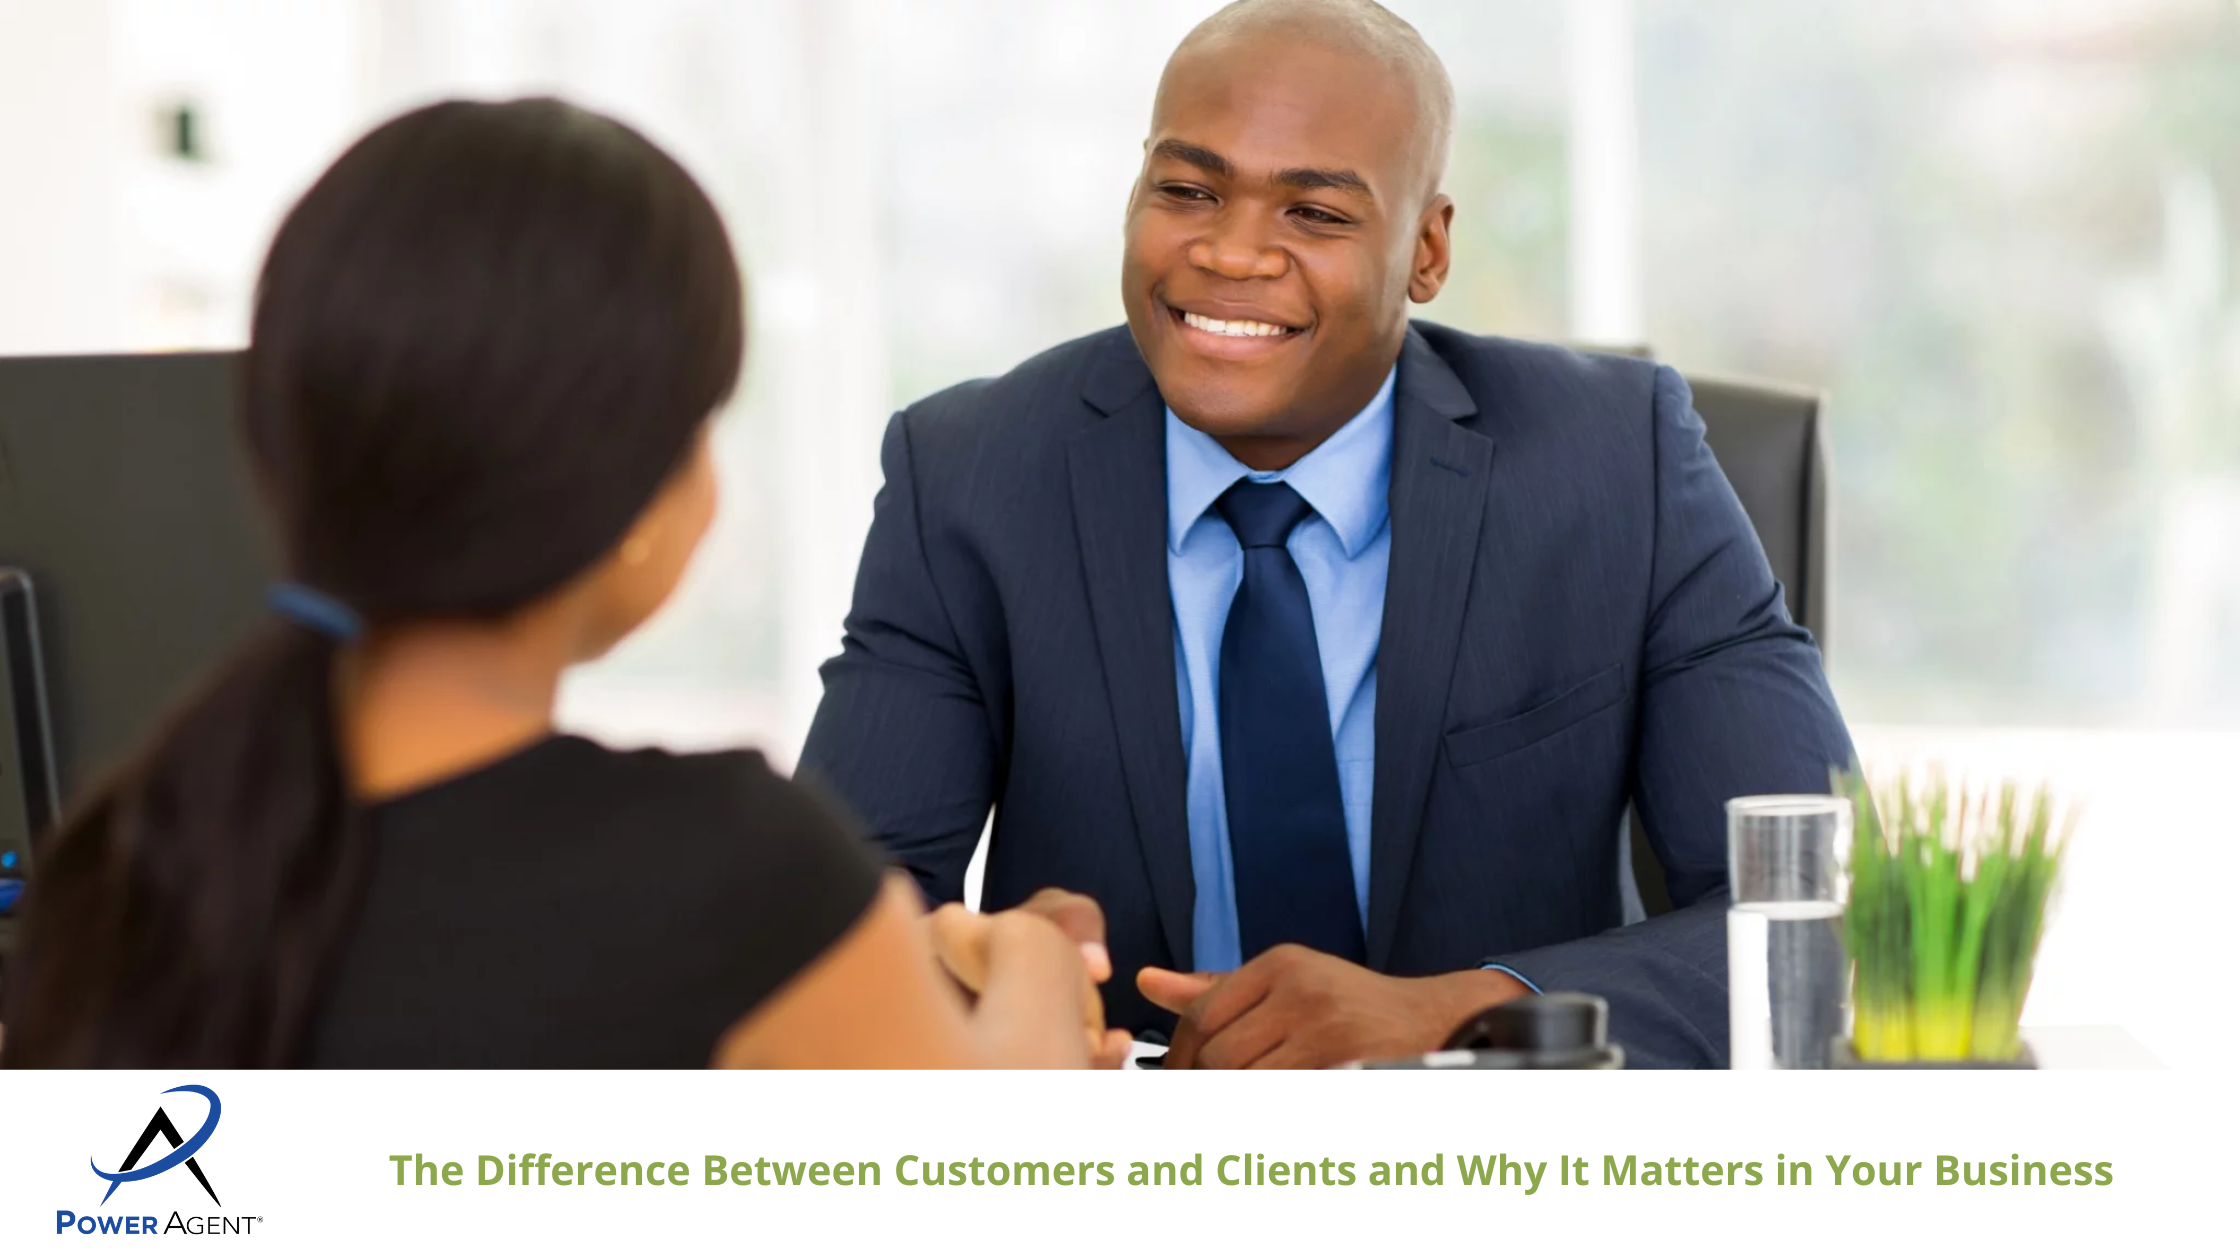 The Difference Between Customers and Clients and Why It Matters in Your Business